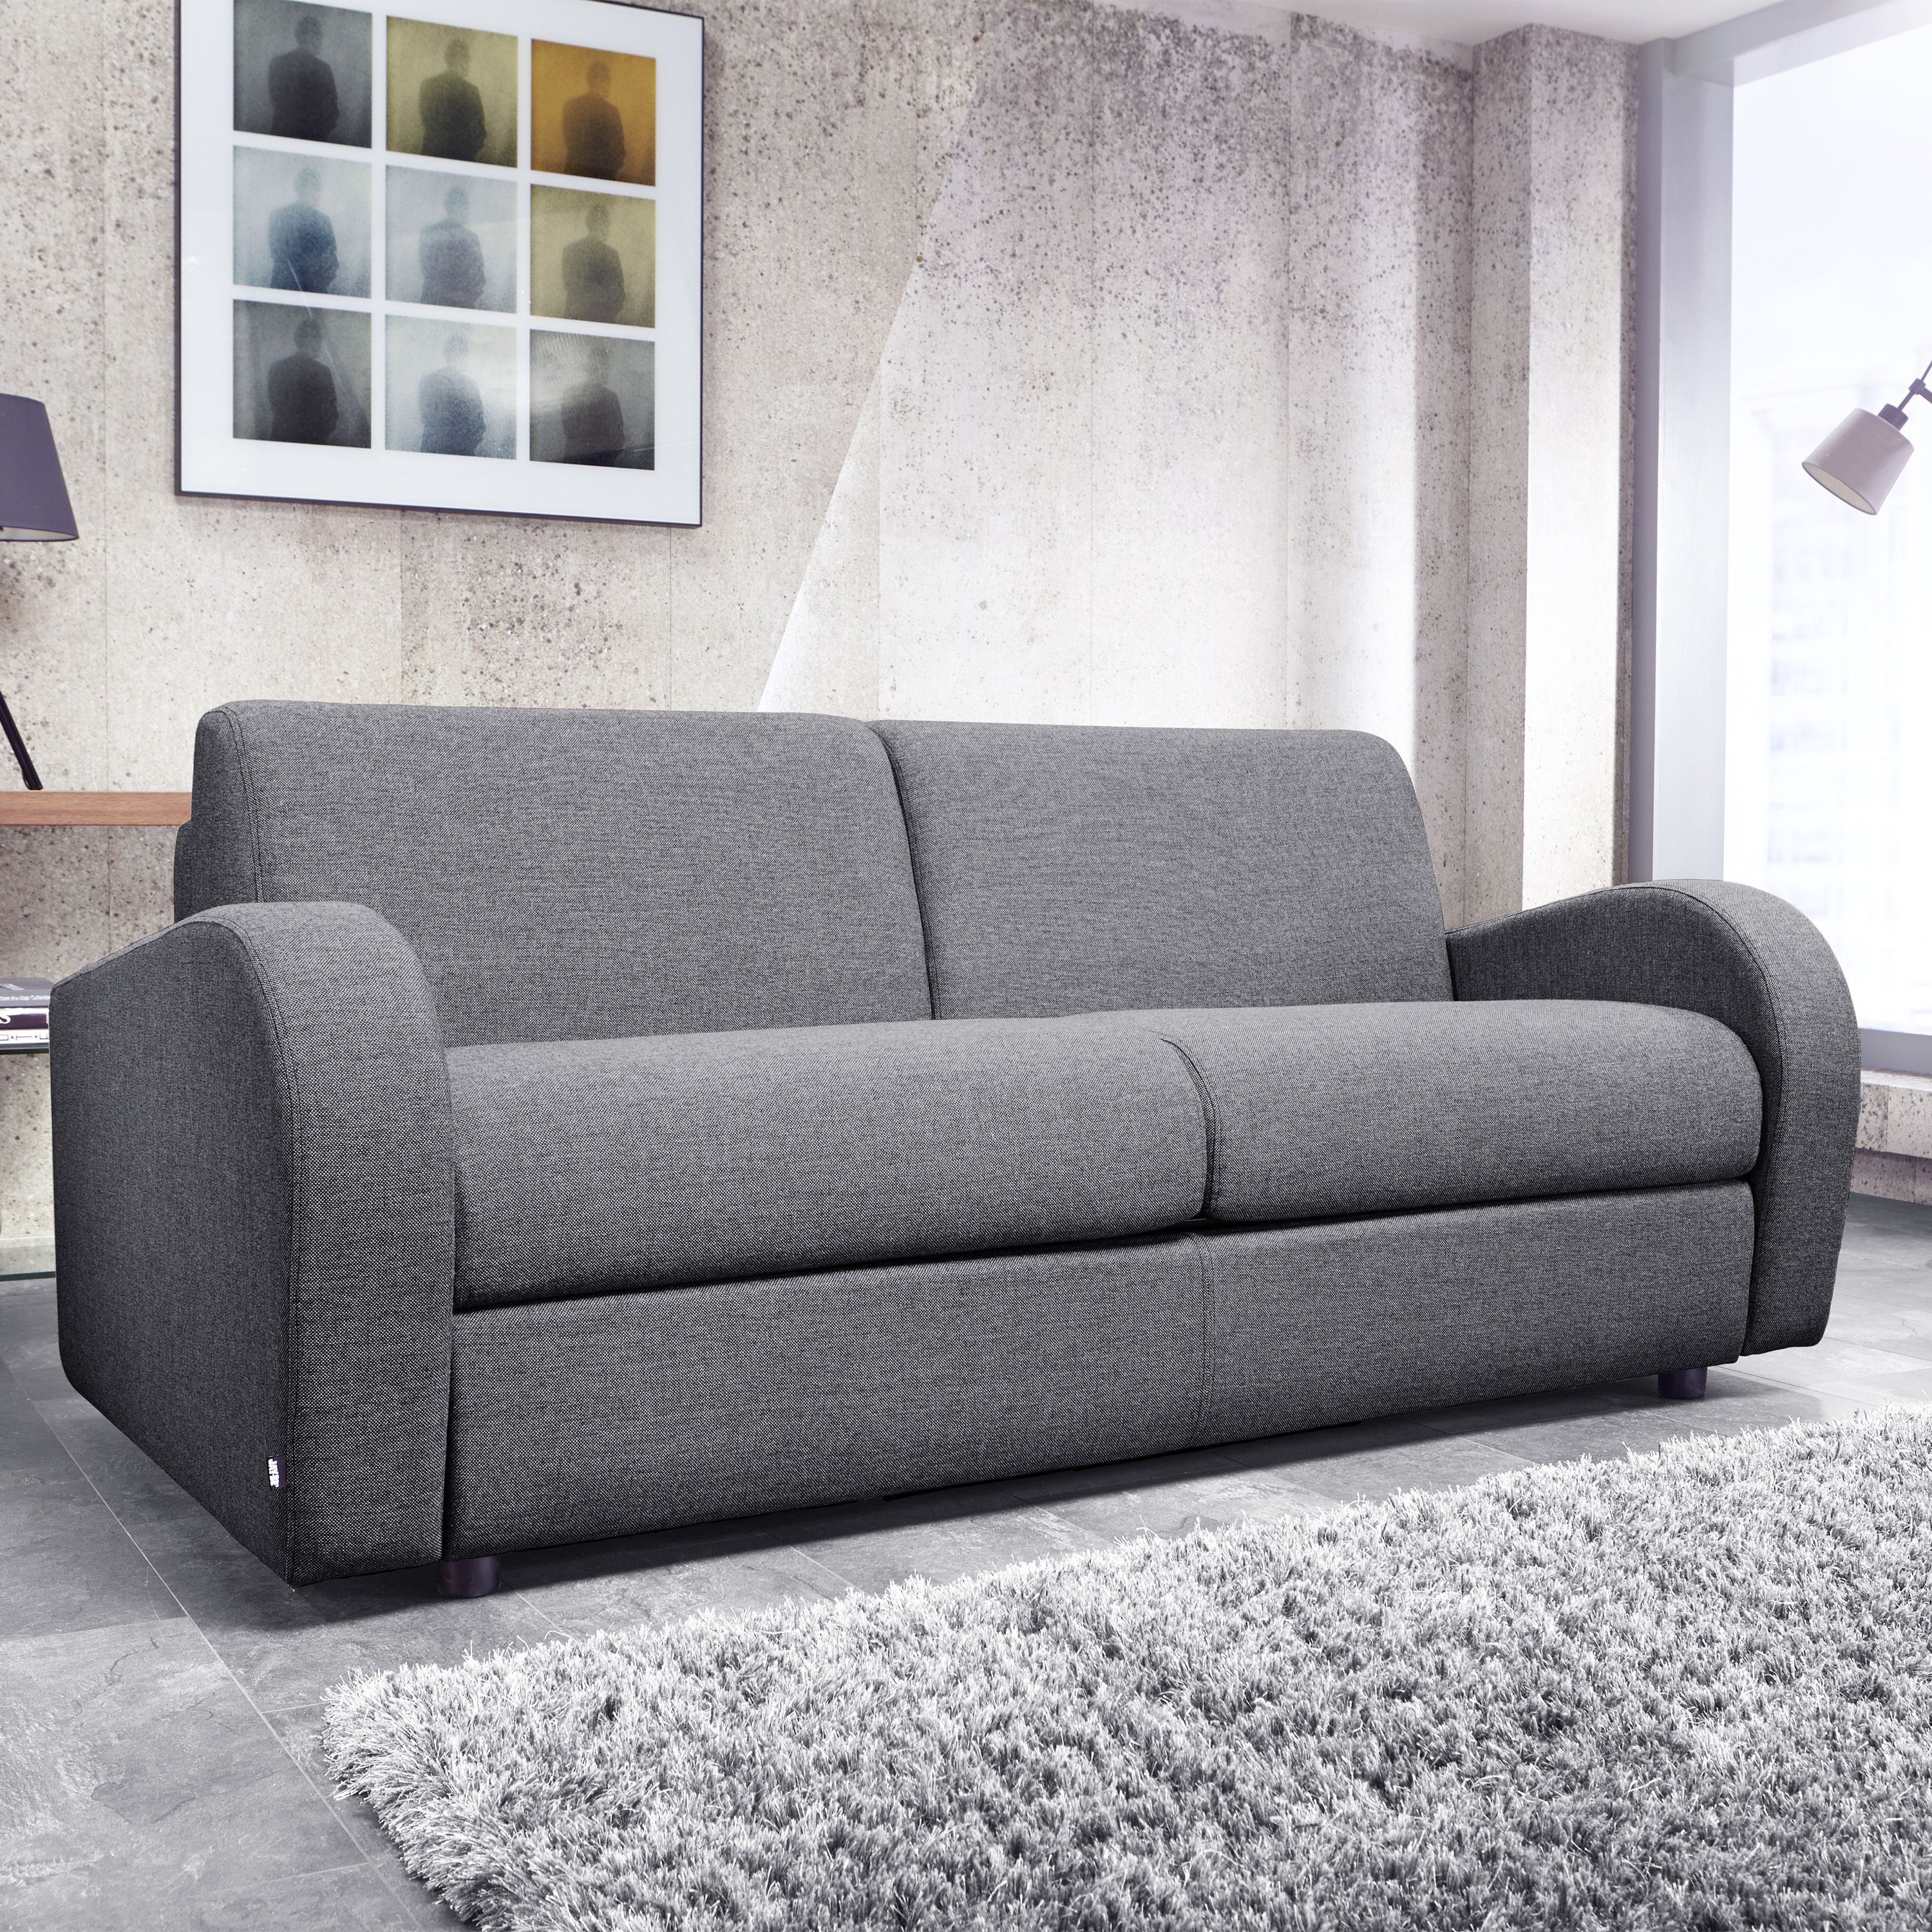 Jay-Be Retro Raven 3 Seater Sofa bed